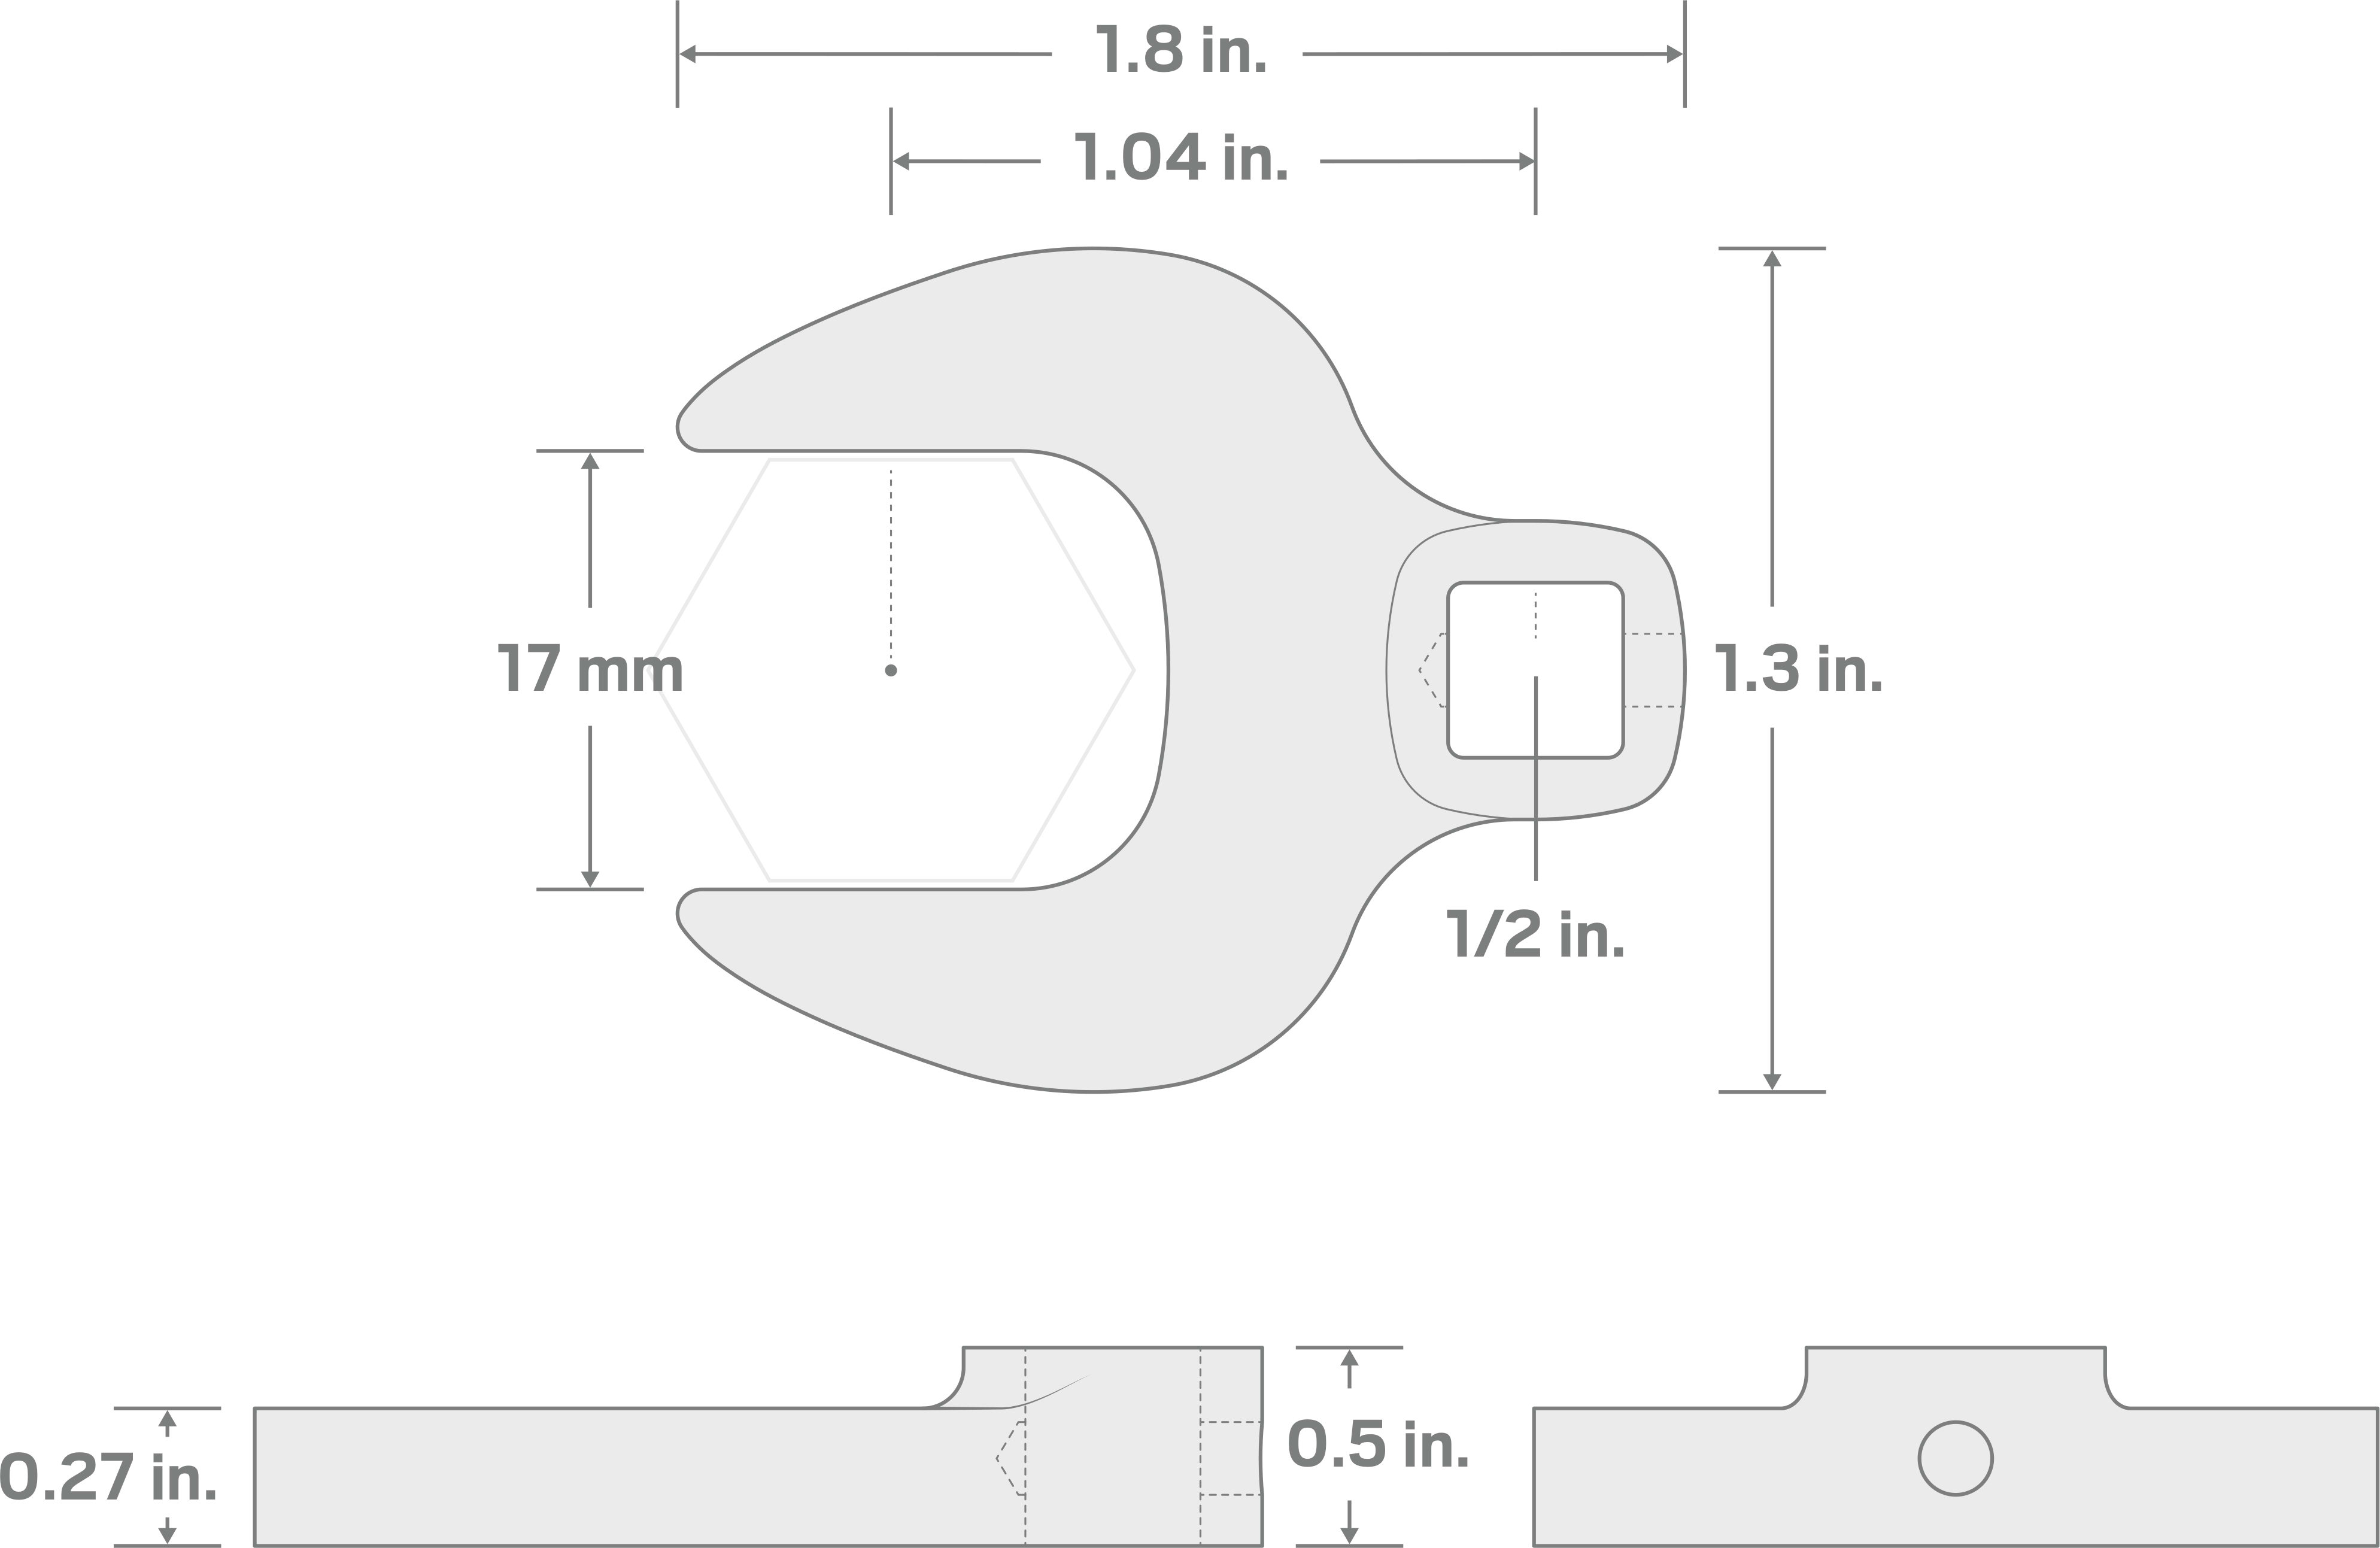 Specs for 1/2 Inch Drive x 17 mm Crowfoot Wrench